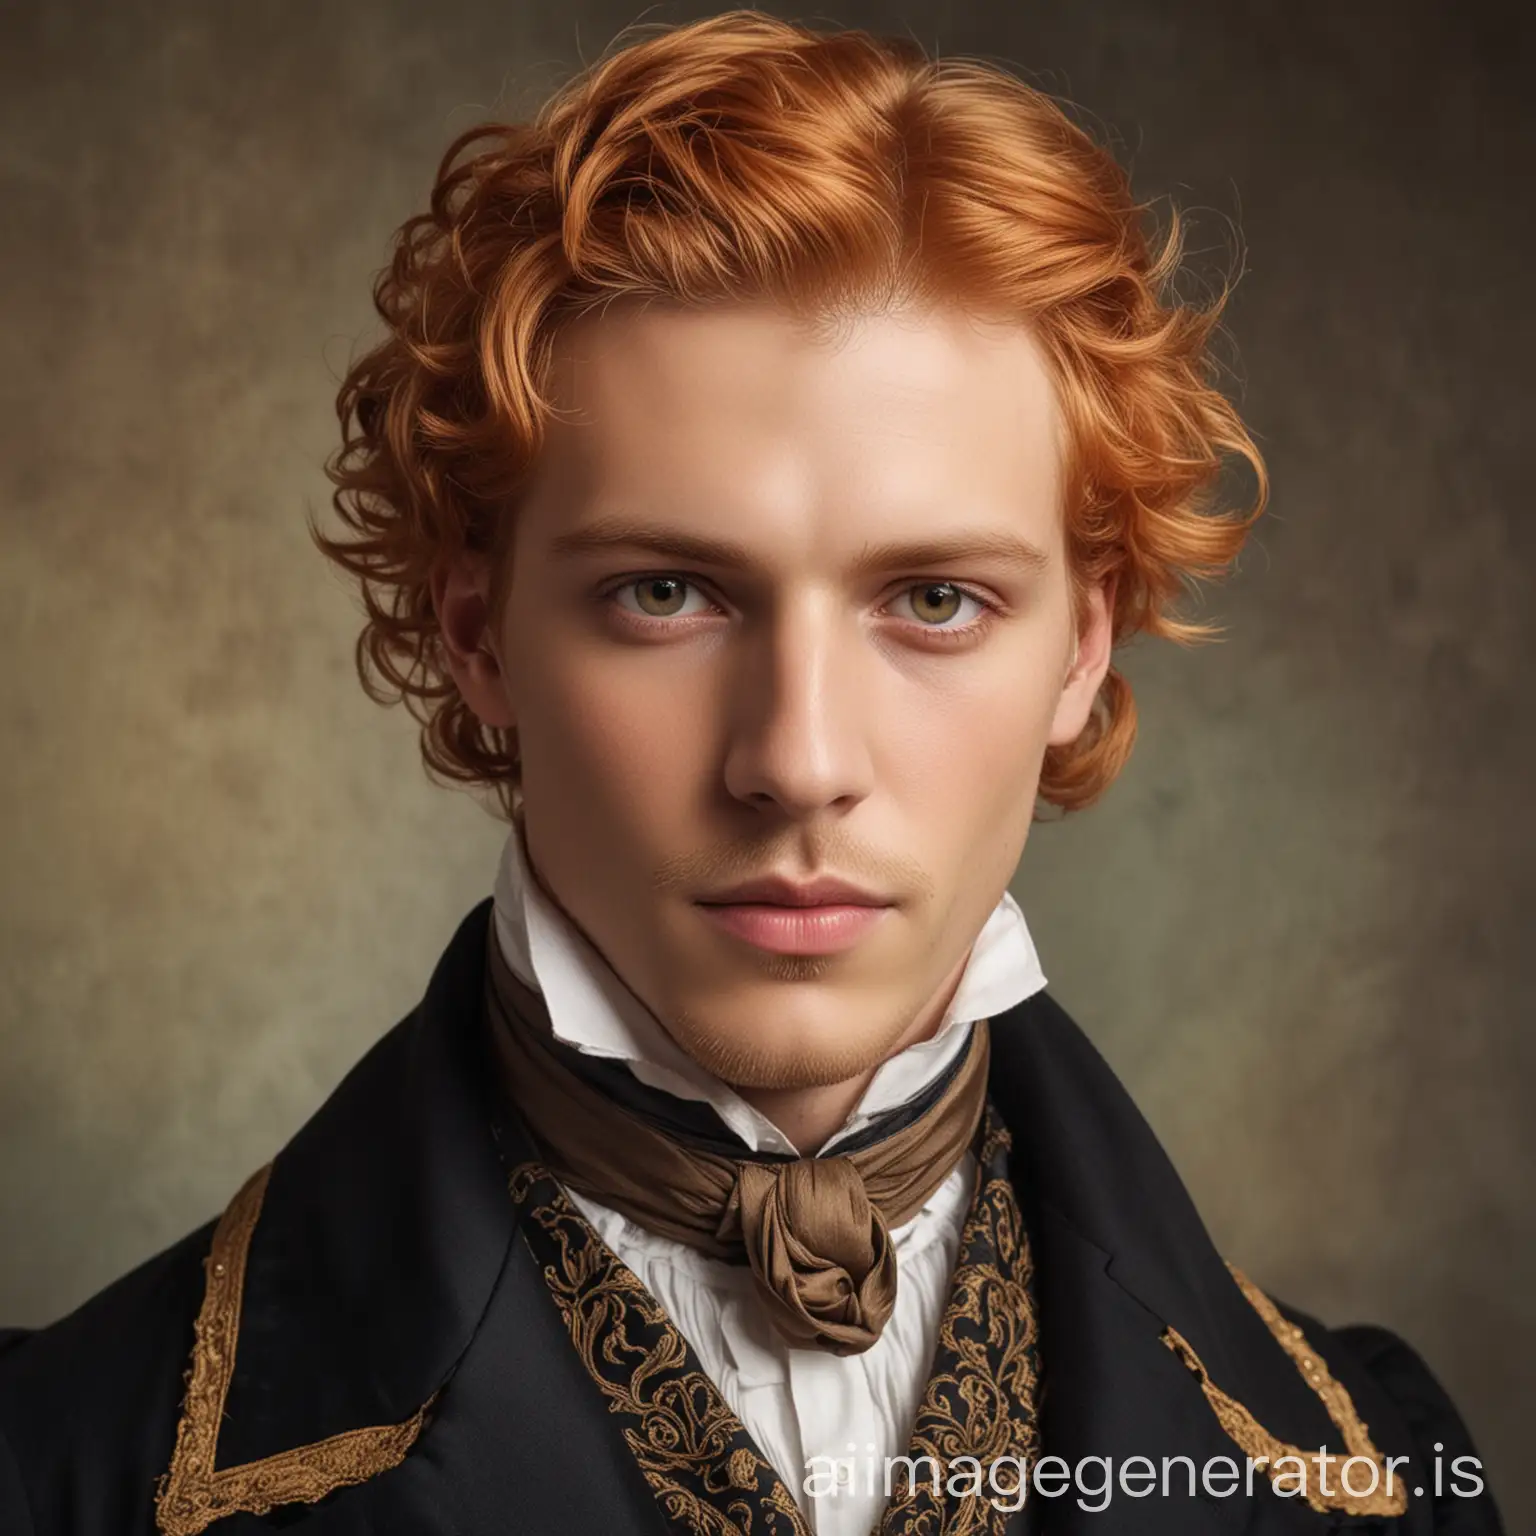 Elegant-Victorian-Man-with-Strawberry-Blonde-Hair-and-Intense-Brown-Eyes